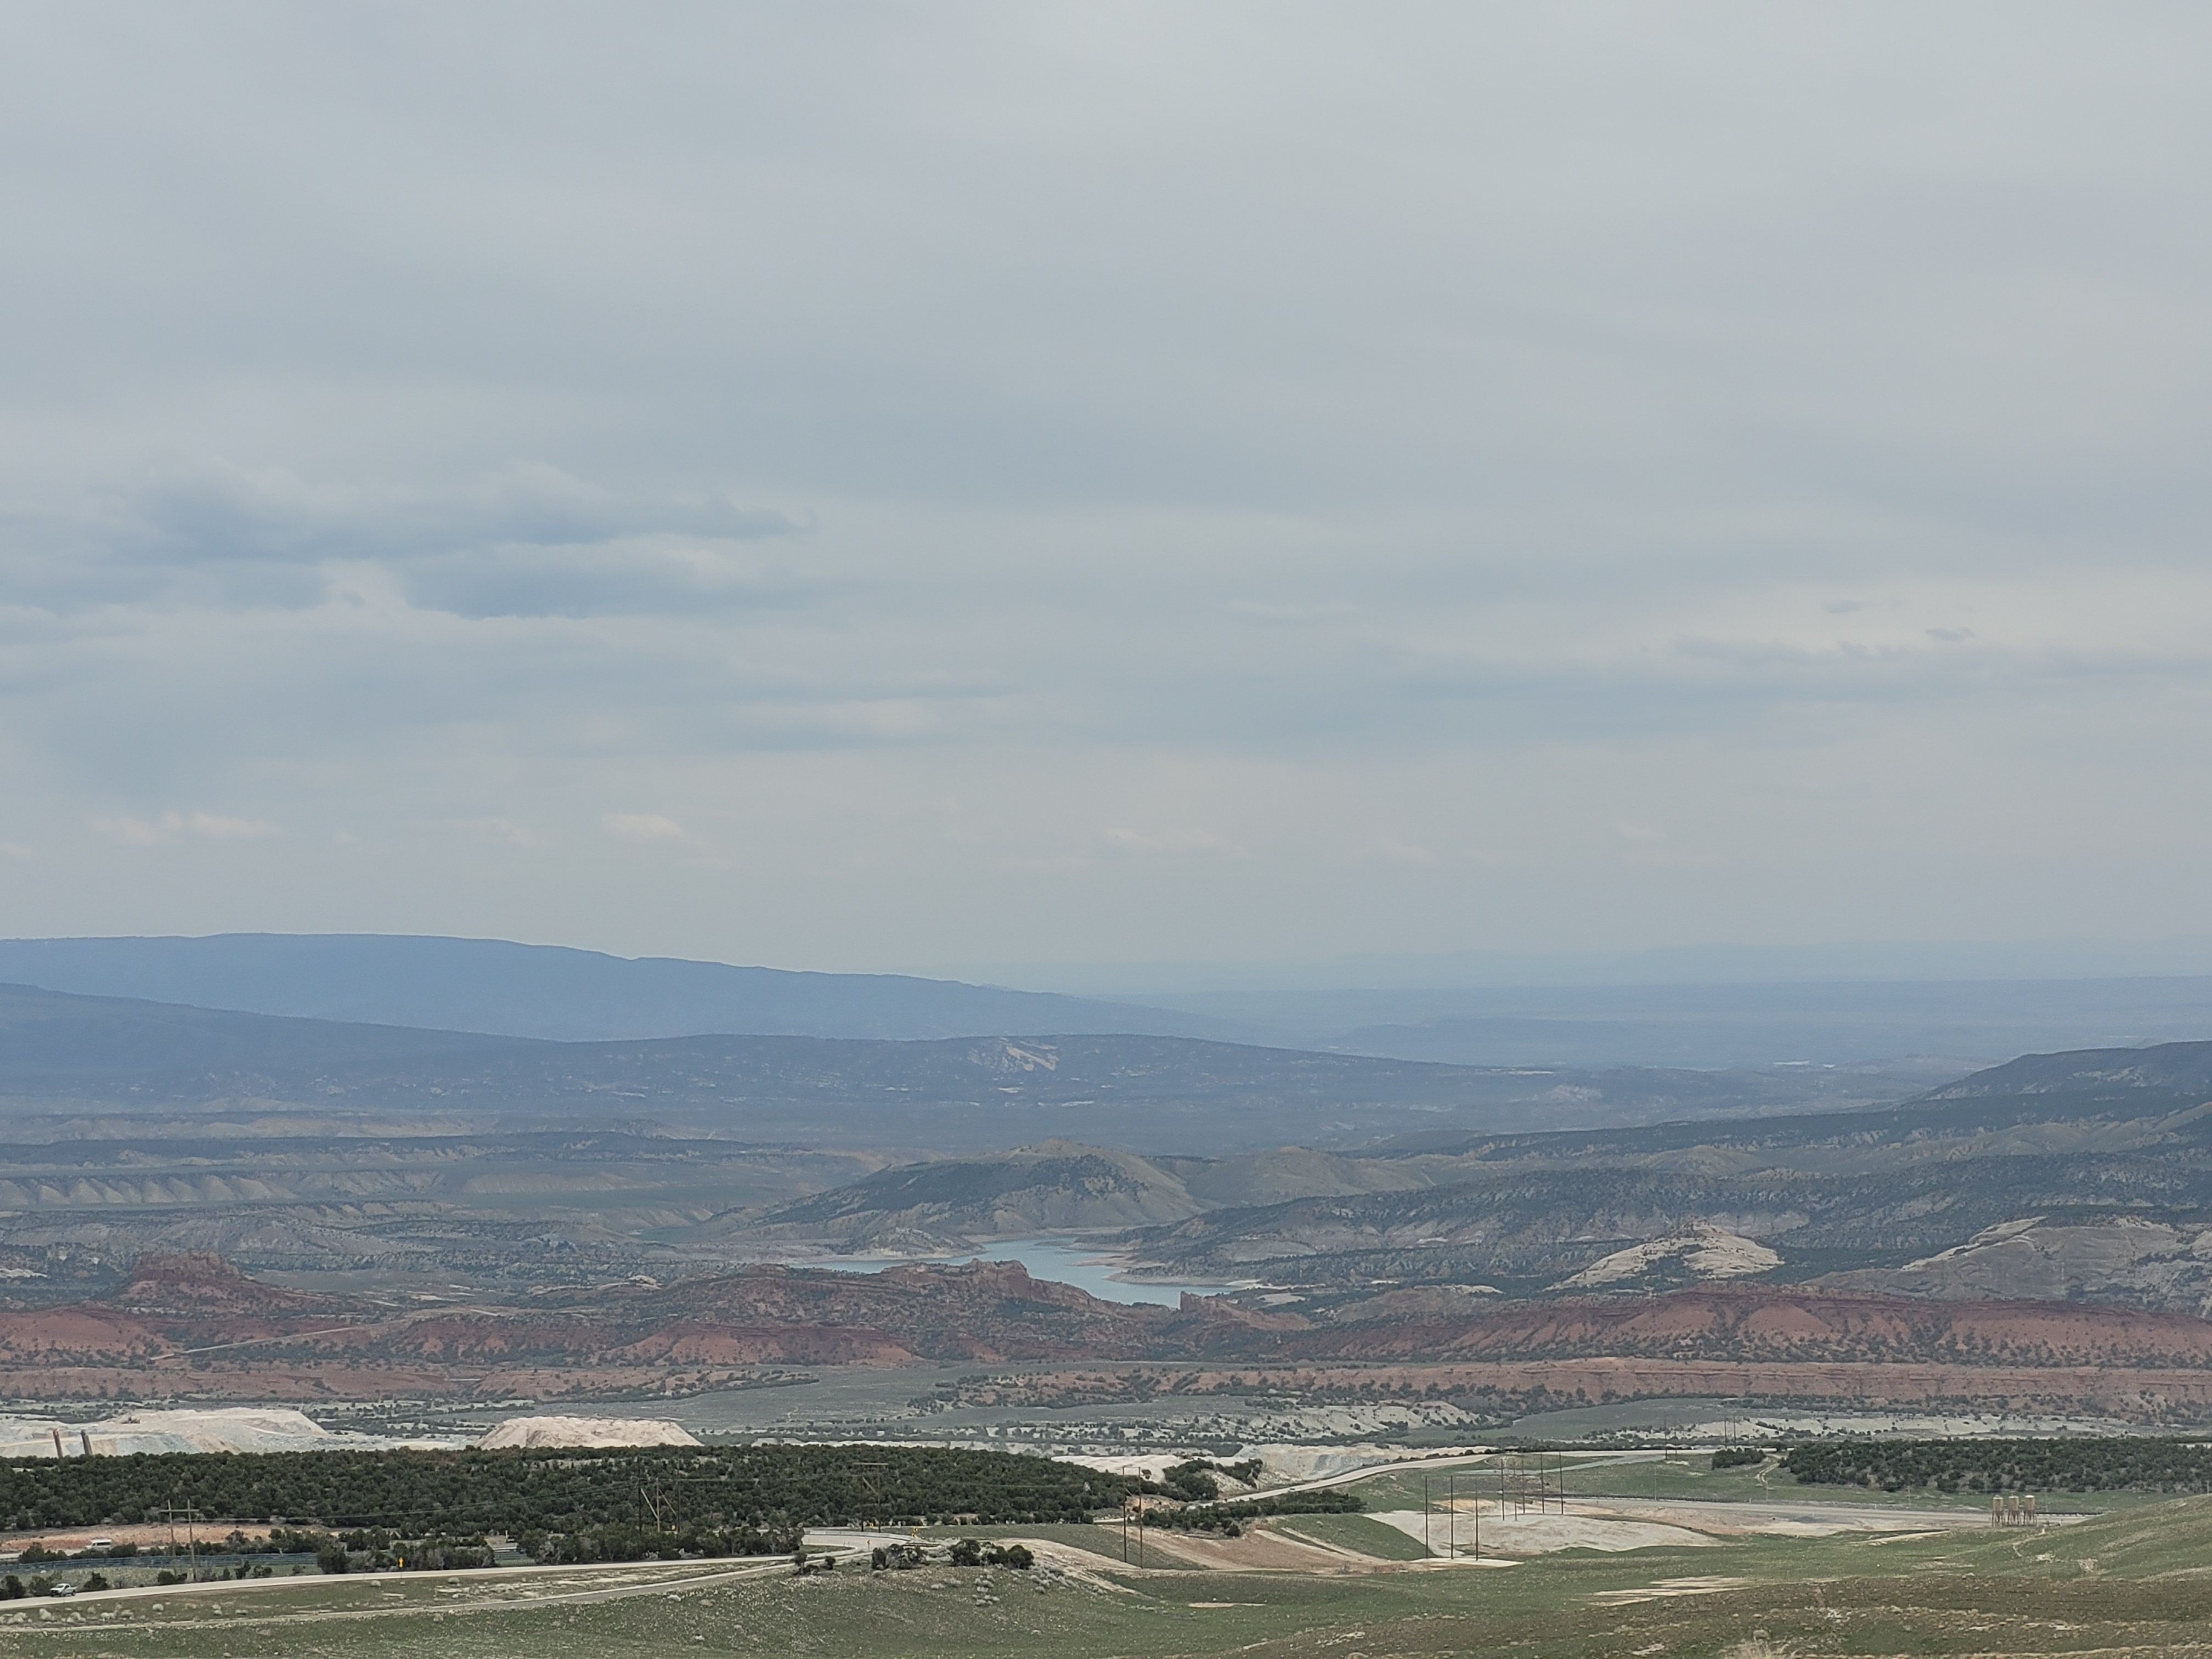 Overlooking the lake of Flaming Gorge Reservoir on highway 44, closer to the 191.